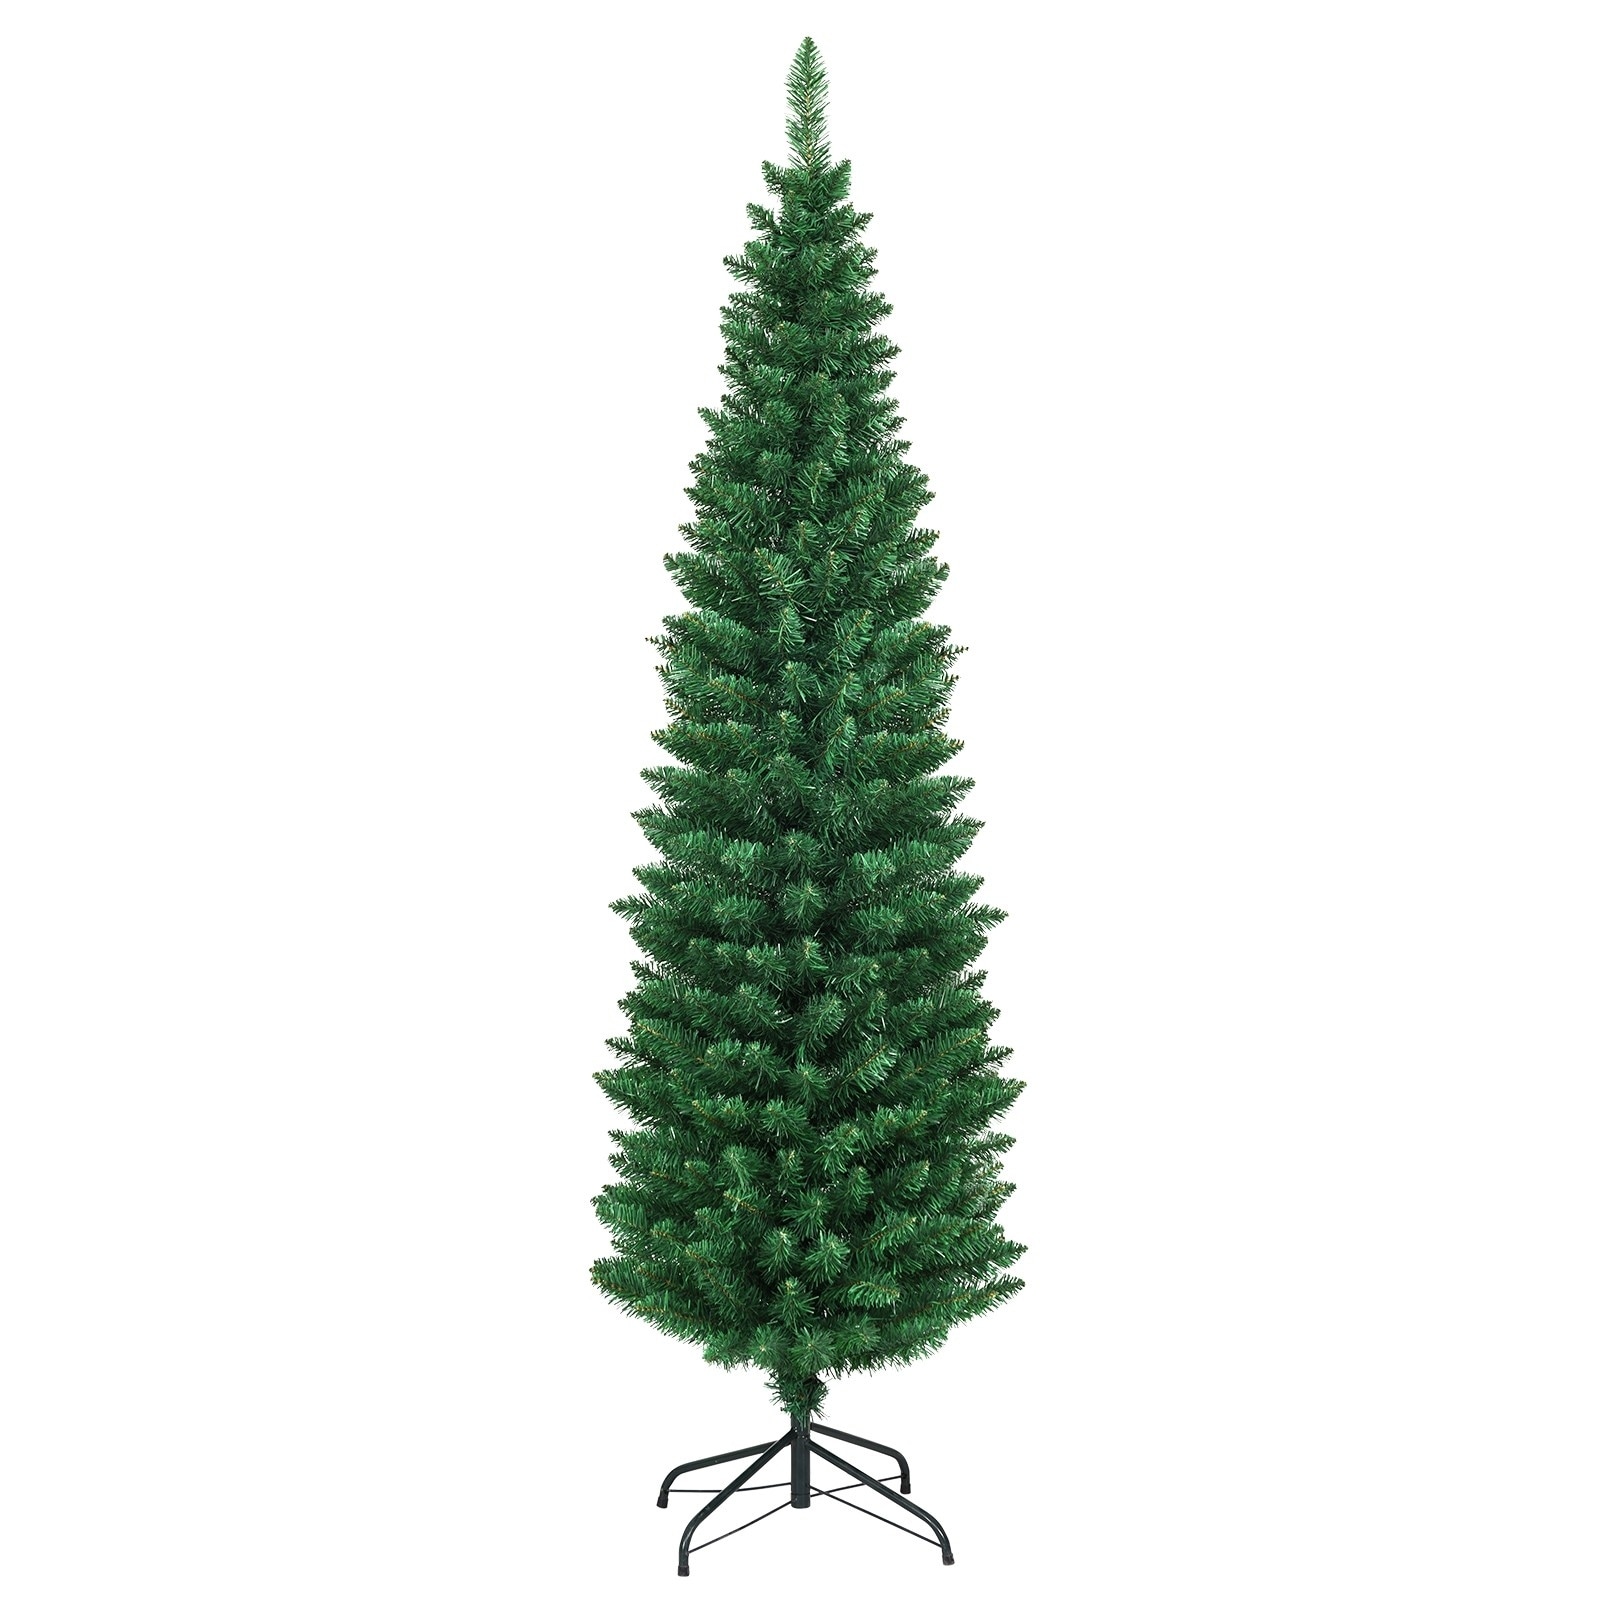 PVC Artificial Slim Pencil Christmas Tree with Stand - 6' - 6ft